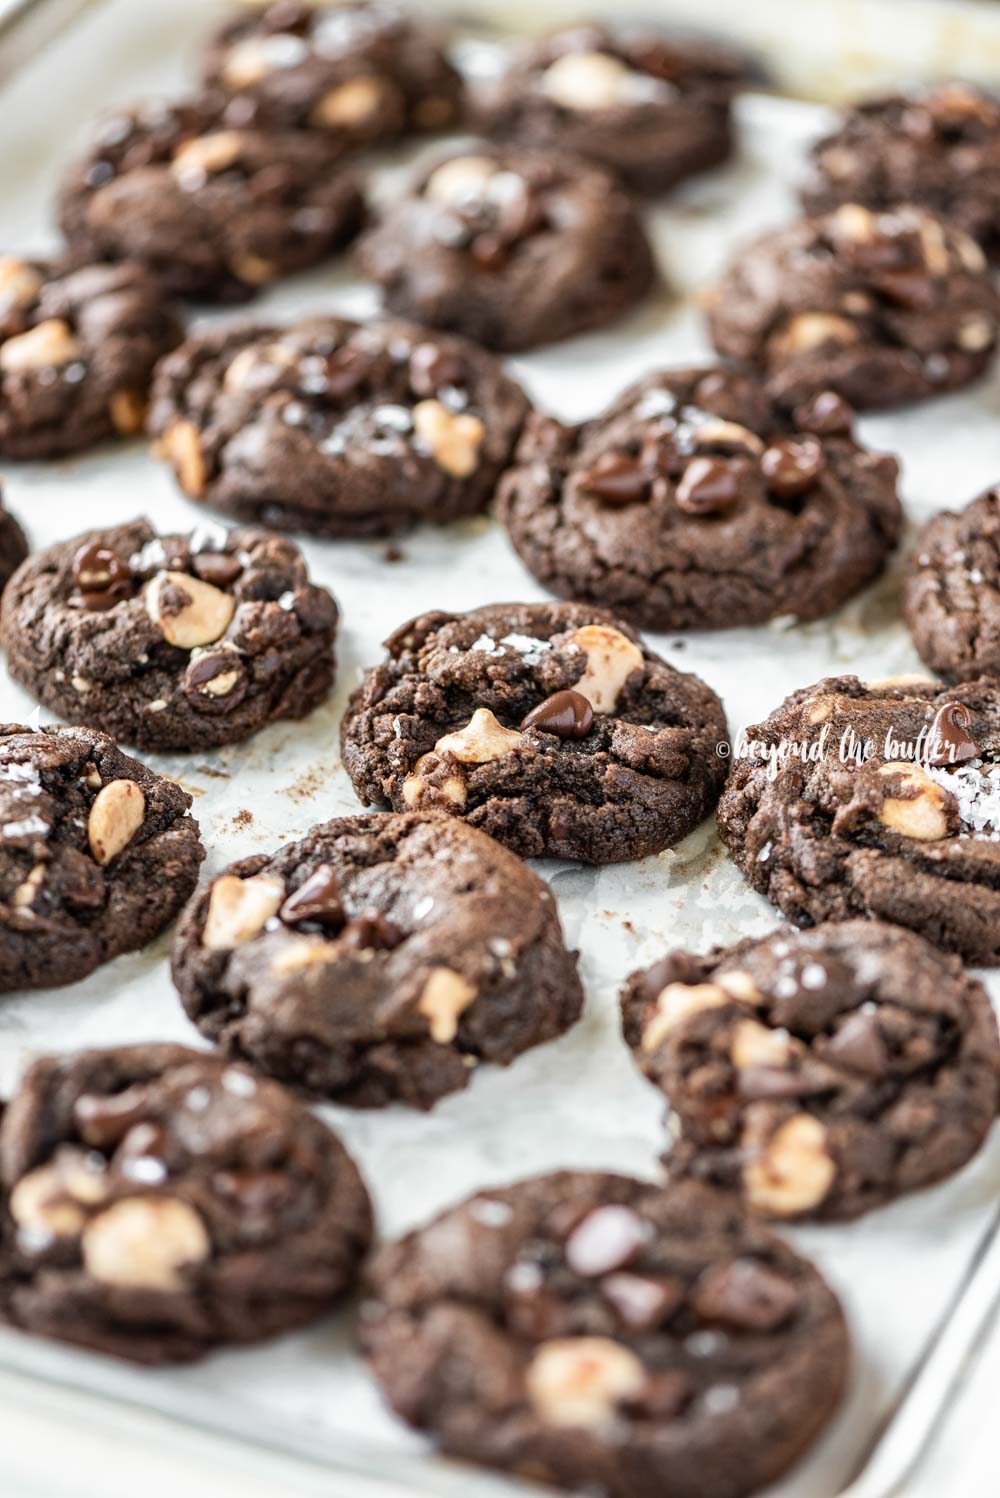 Angled image of just baked double chocolate salted caramel cookies on a baking sheet | All Images © Beyond the Butter™